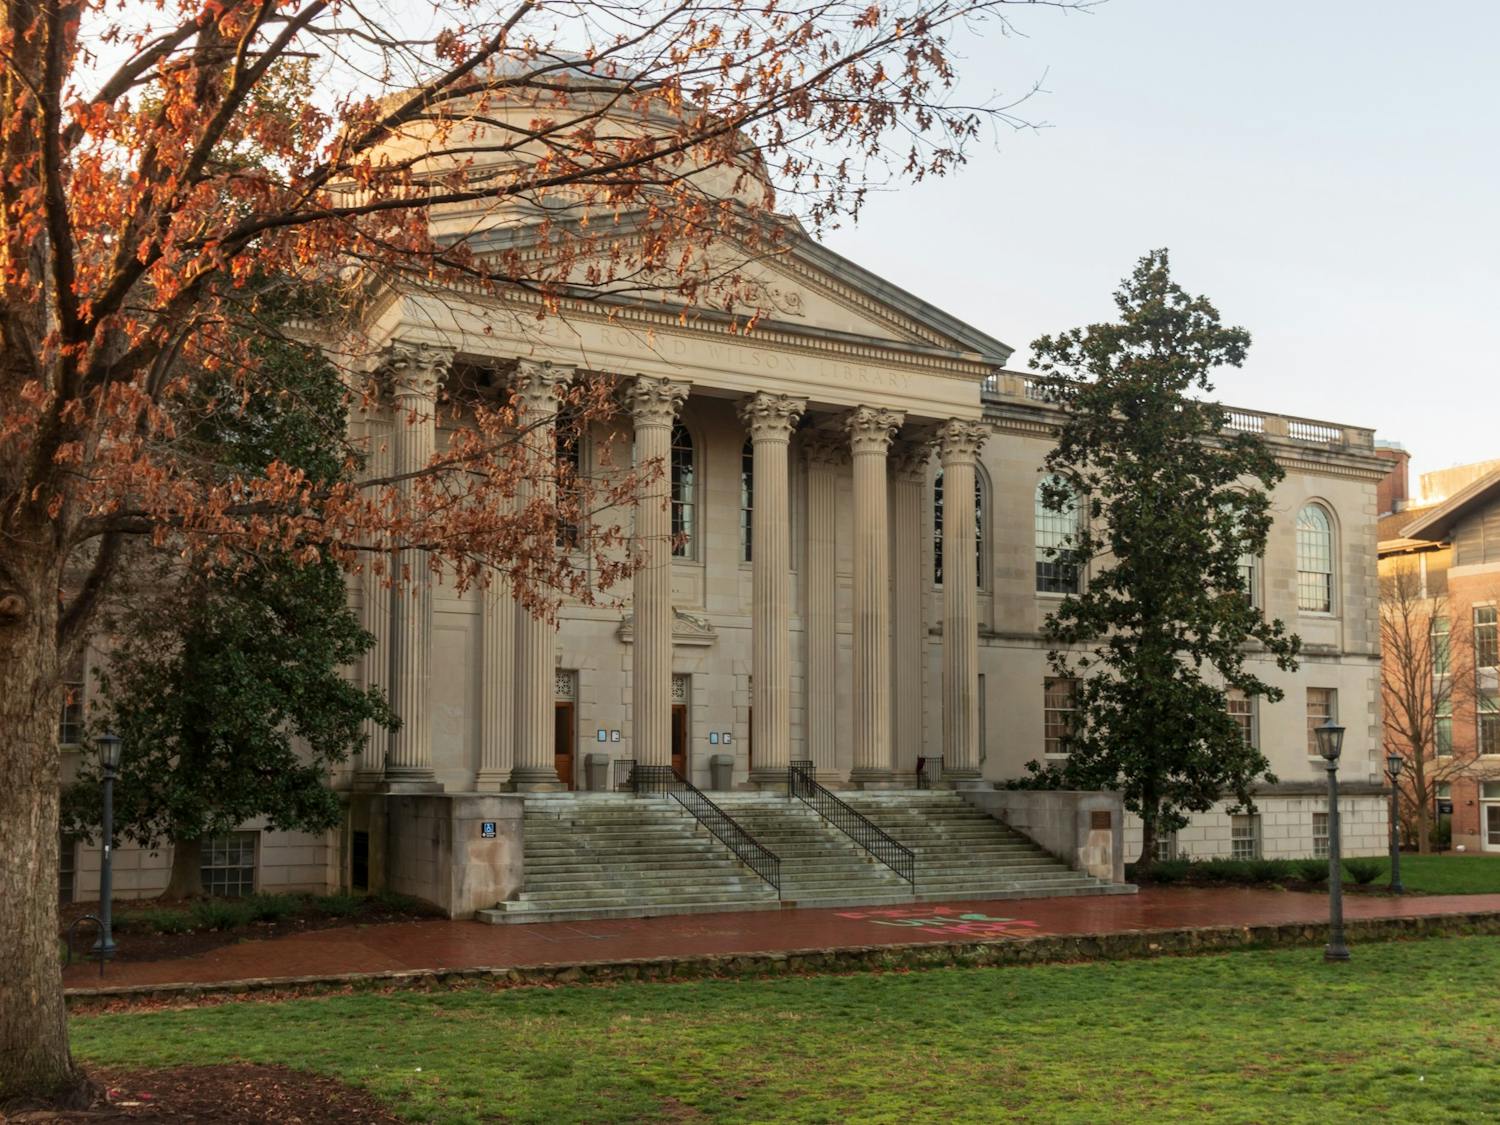 THE 32-HOUR FIGHT FOR ACCESSIBILITY AT UNC